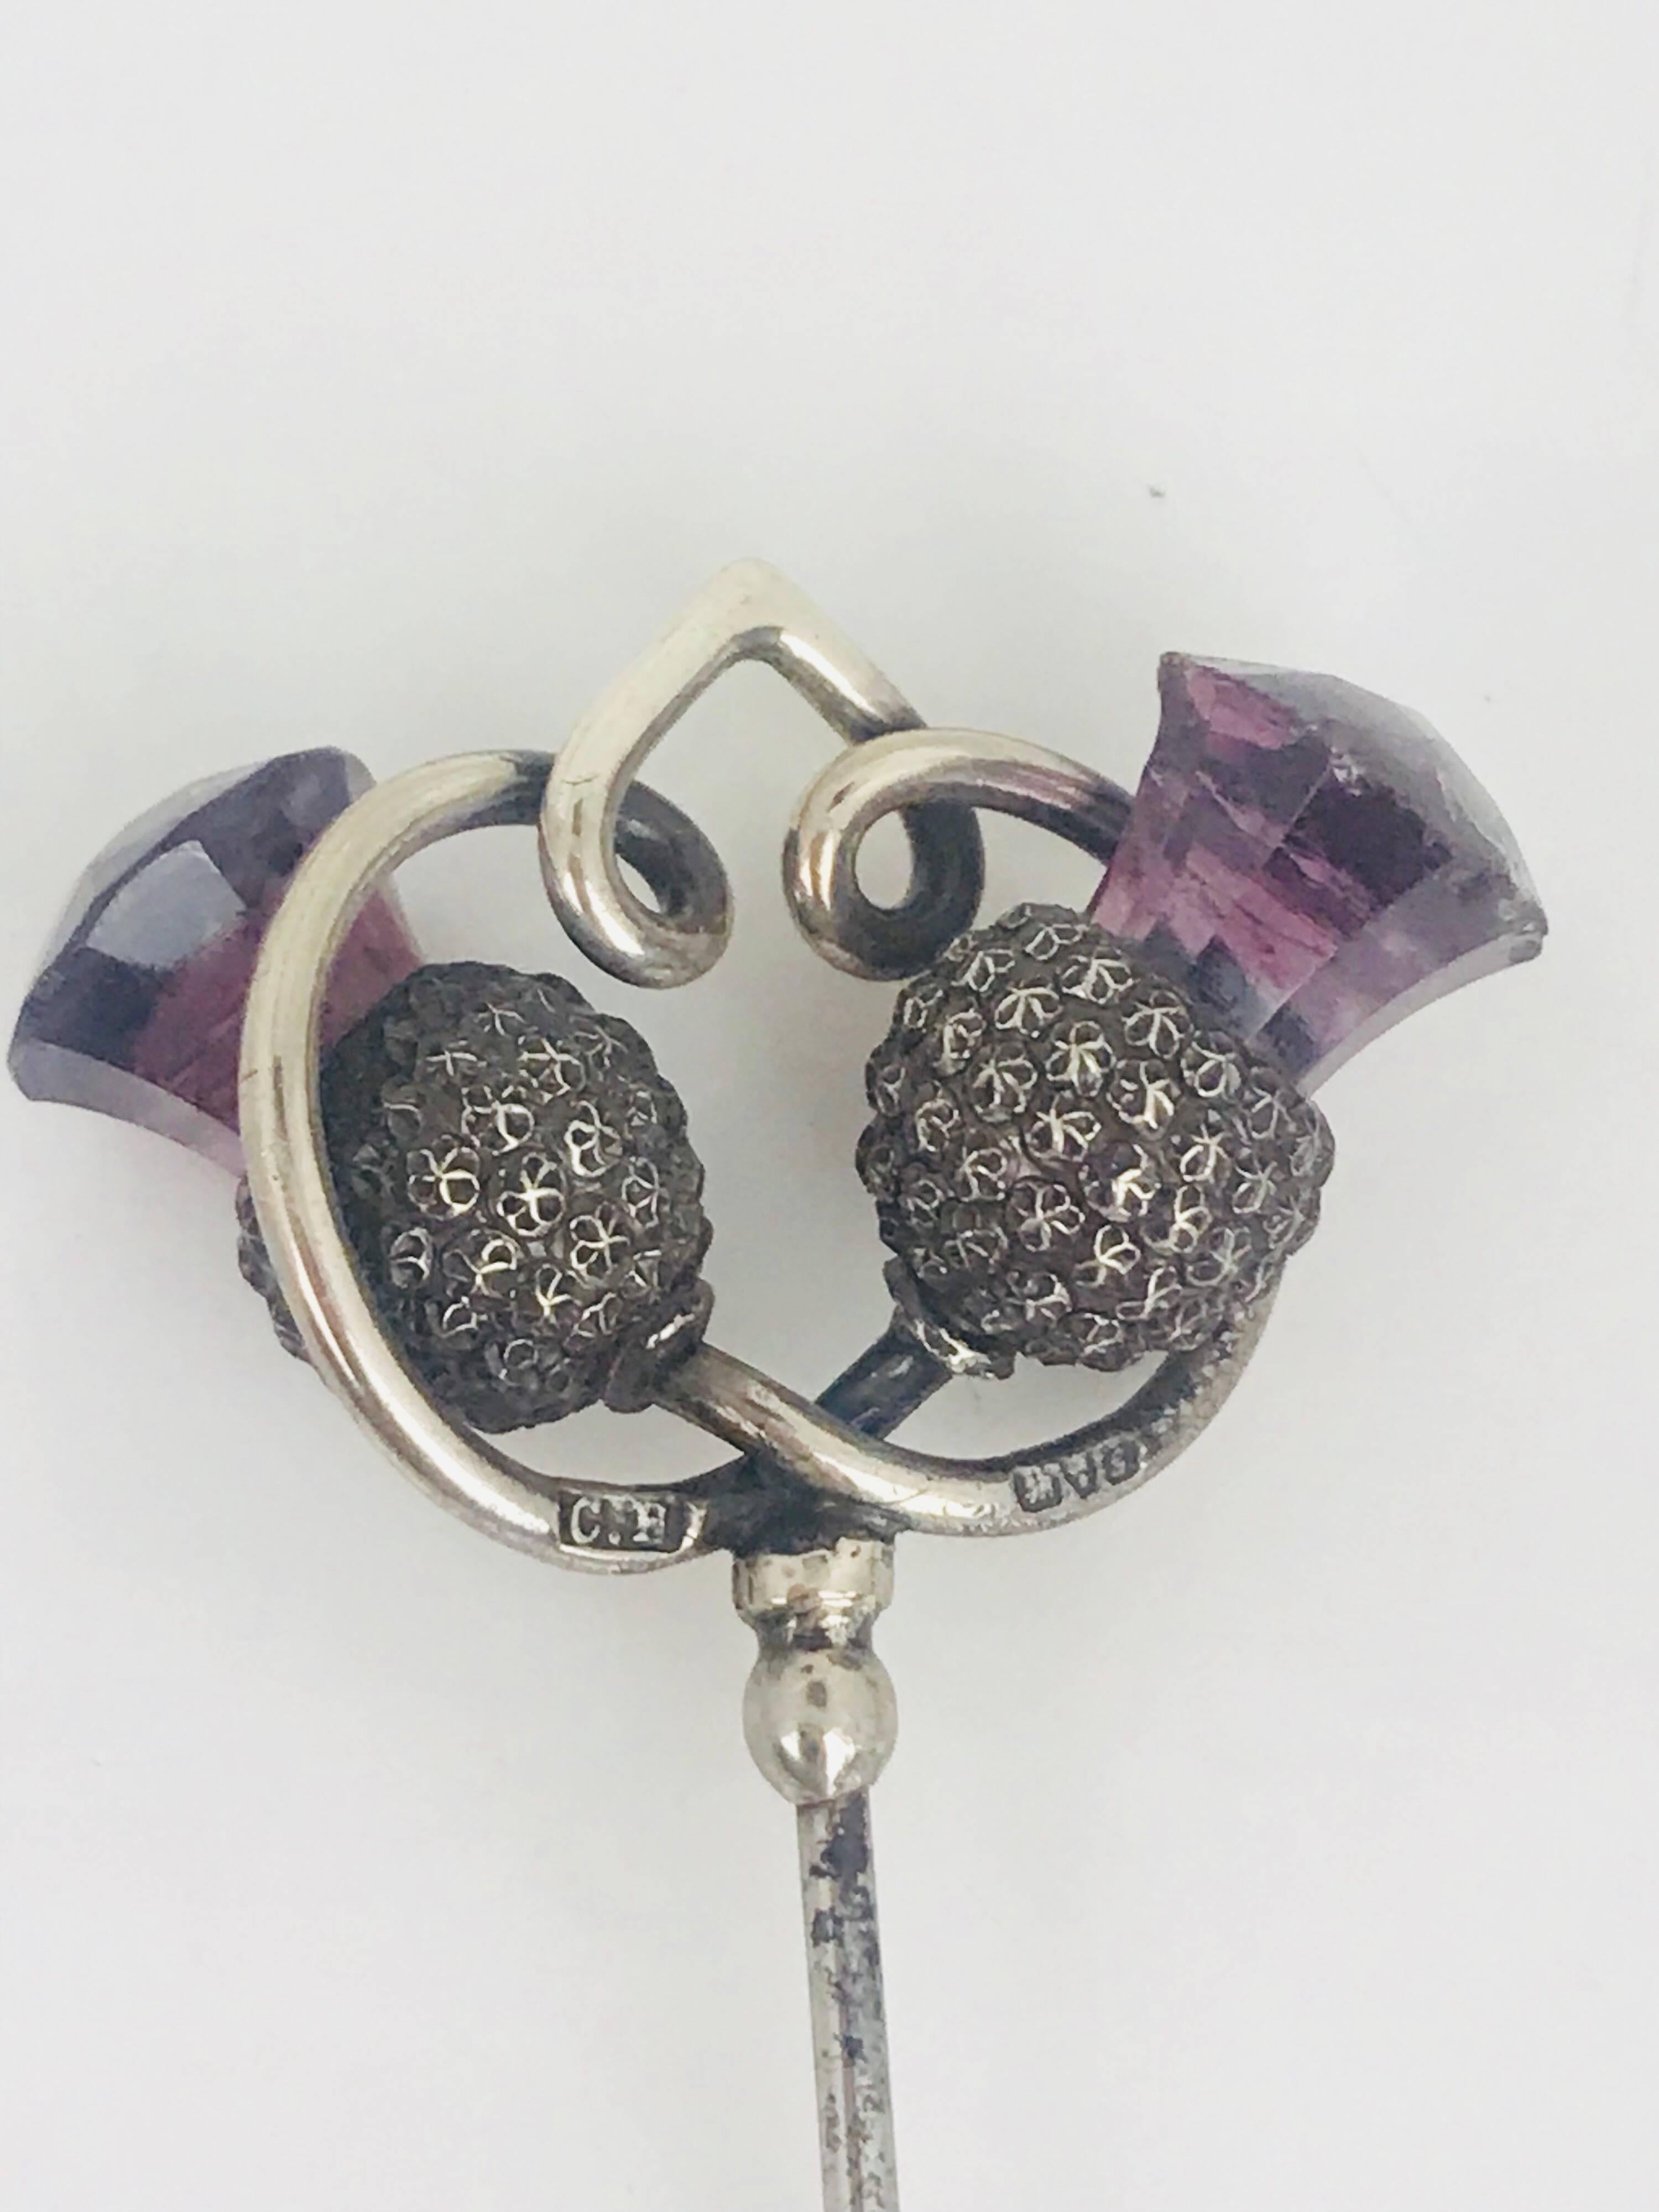 Pair of Victorian hat pins , rare to find a set, with a rosebud motif, made of sterling silver and amethyst colored purple glass, hallmarked with the letters 